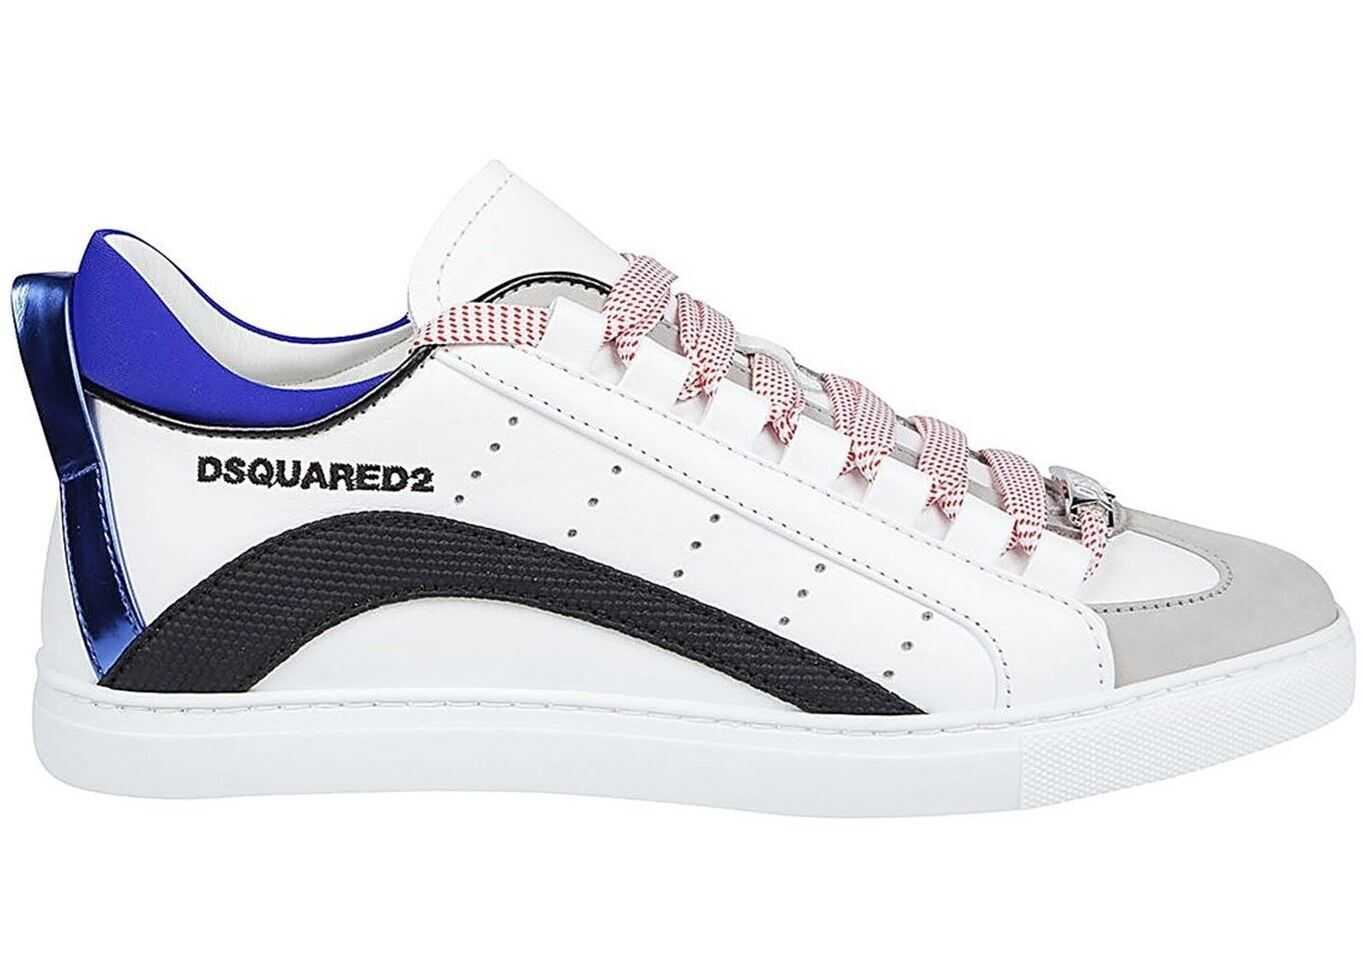 DSQUARED2 Logo Print Leather Sneakers In White SNM009001503995M2069 White